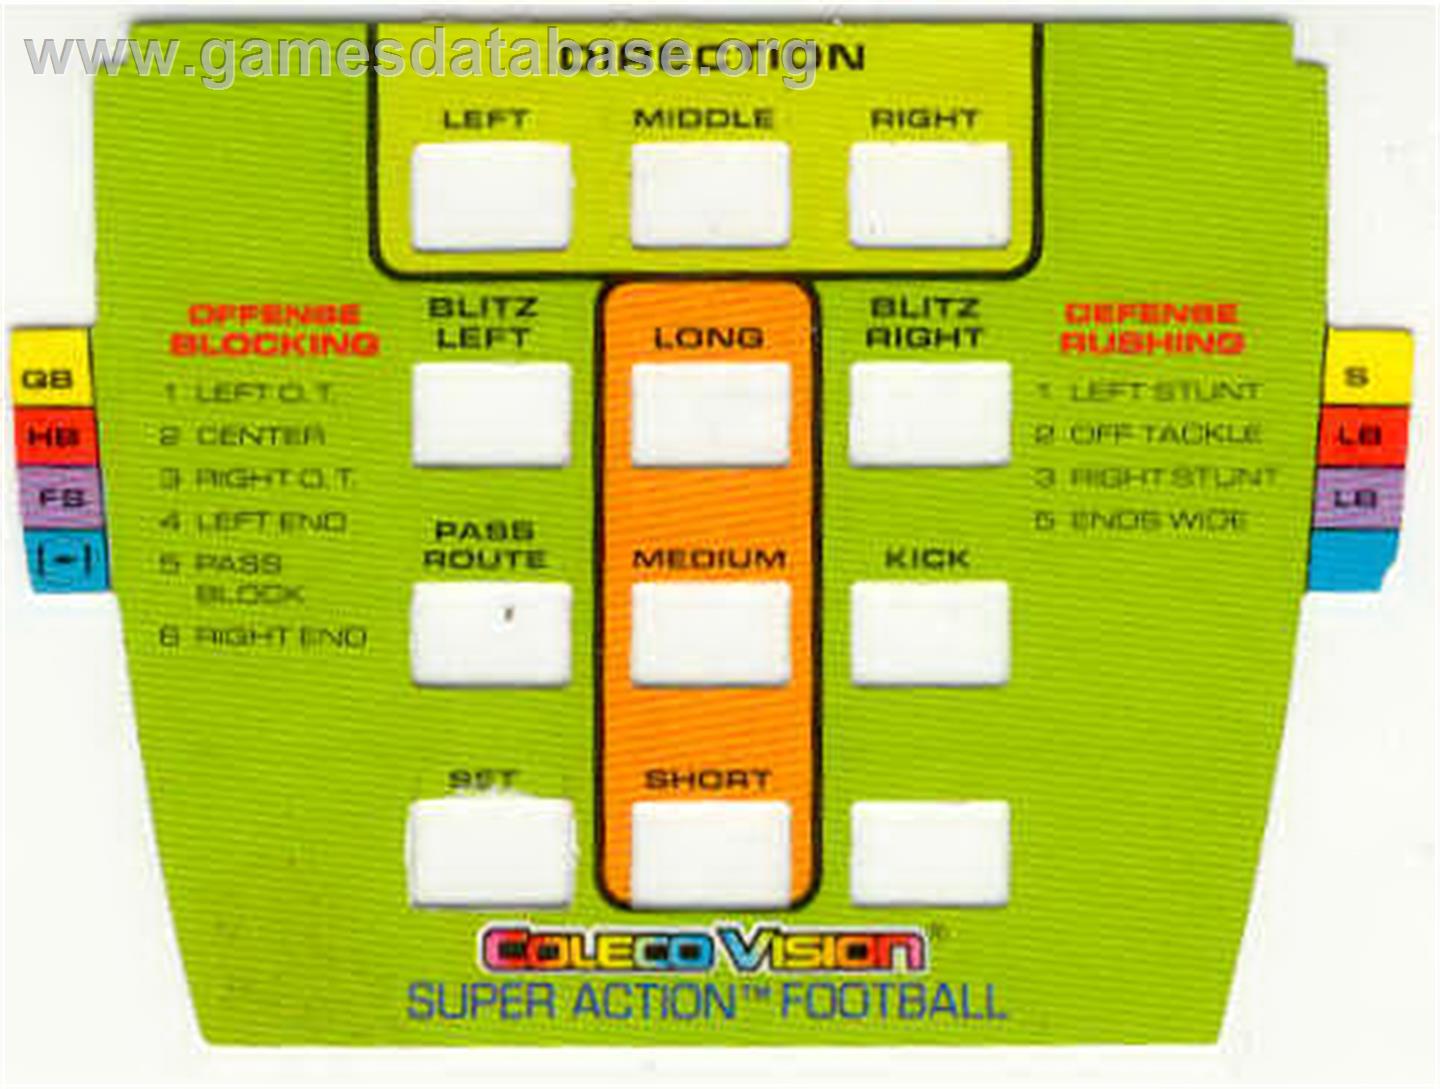 Super Action Football - Coleco Vision - Artwork - Overlay